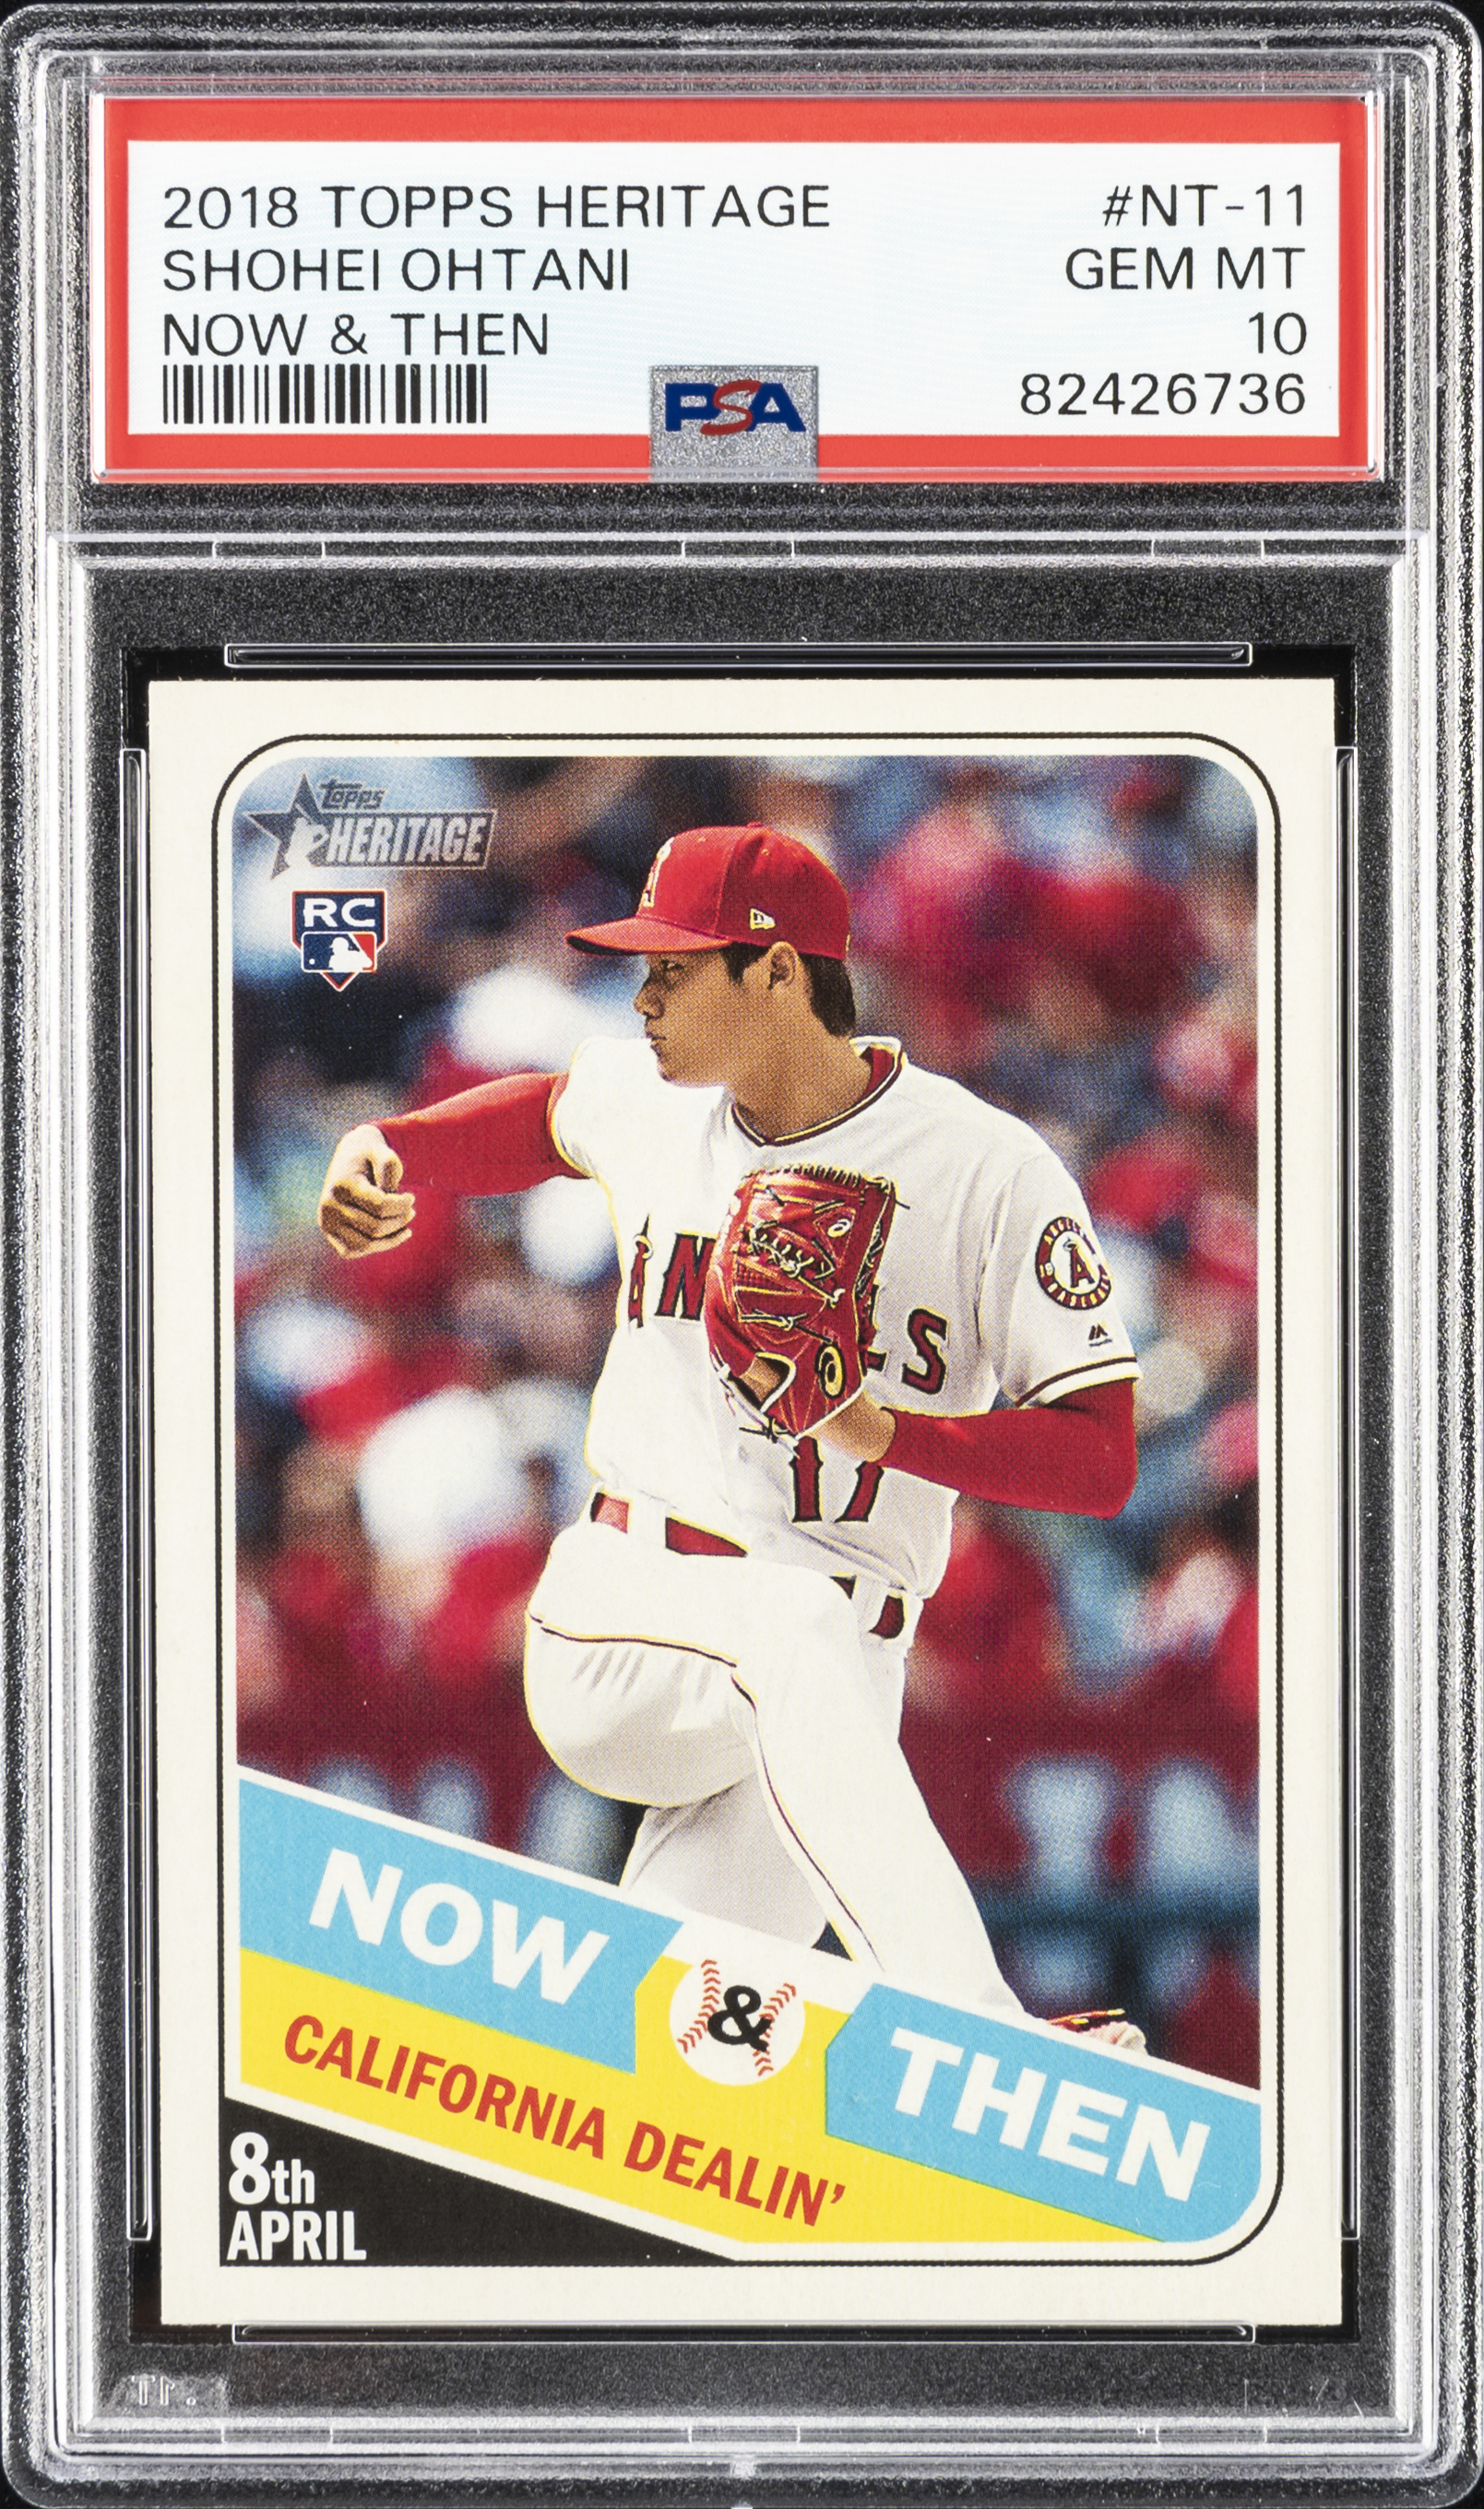 2018 Topps Heritage Now & then #NT-11 Shohei Ohtani Rookie Card – PSA GEM MT 10